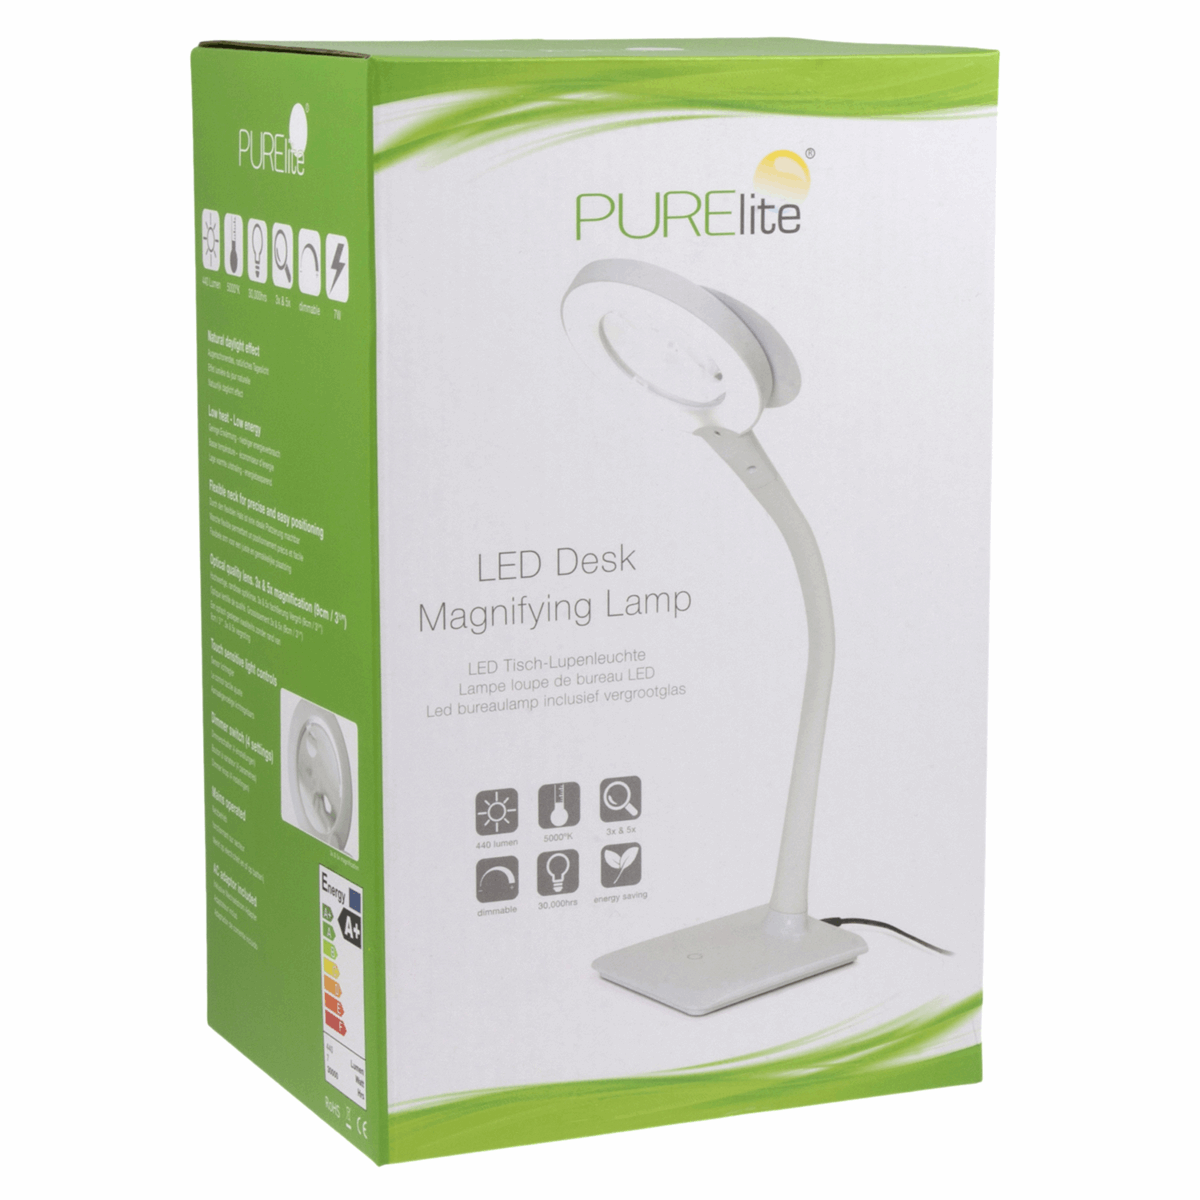 PURElite Magnifying Desk Lamp - Flexible arm with 3x and 5x magnification (mains powered)